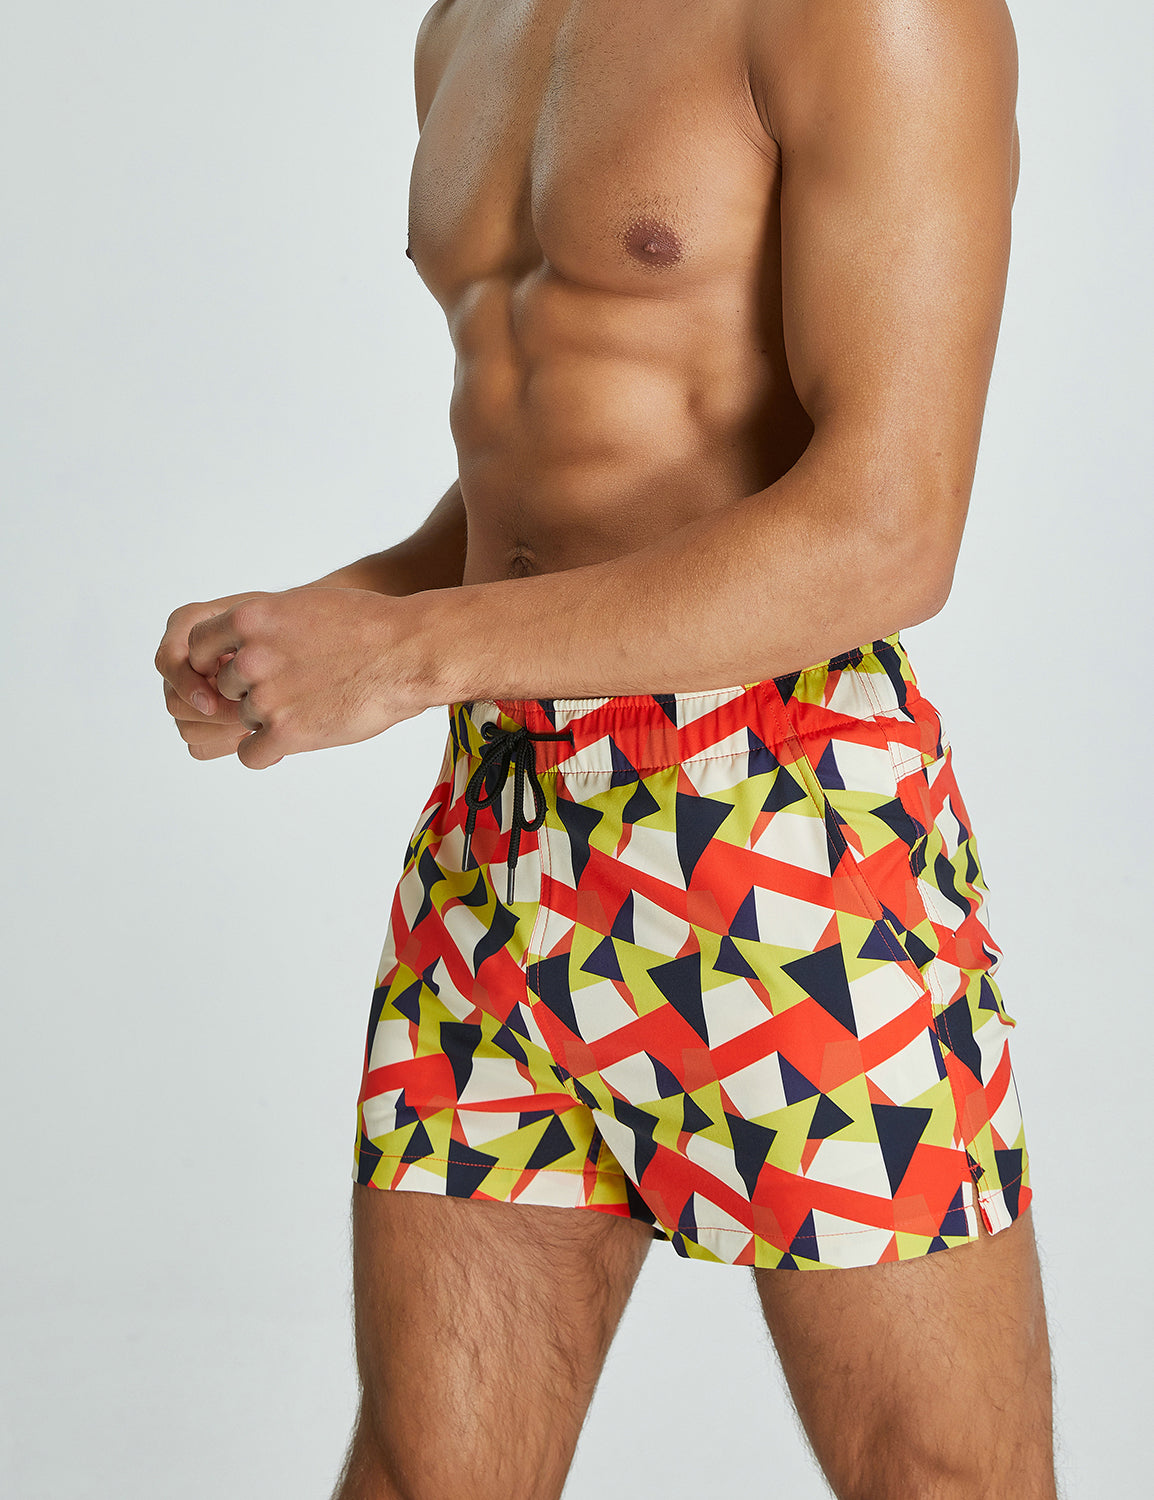 Training Sport Shorts 11301 with Quick-Dry in Colored Triangles